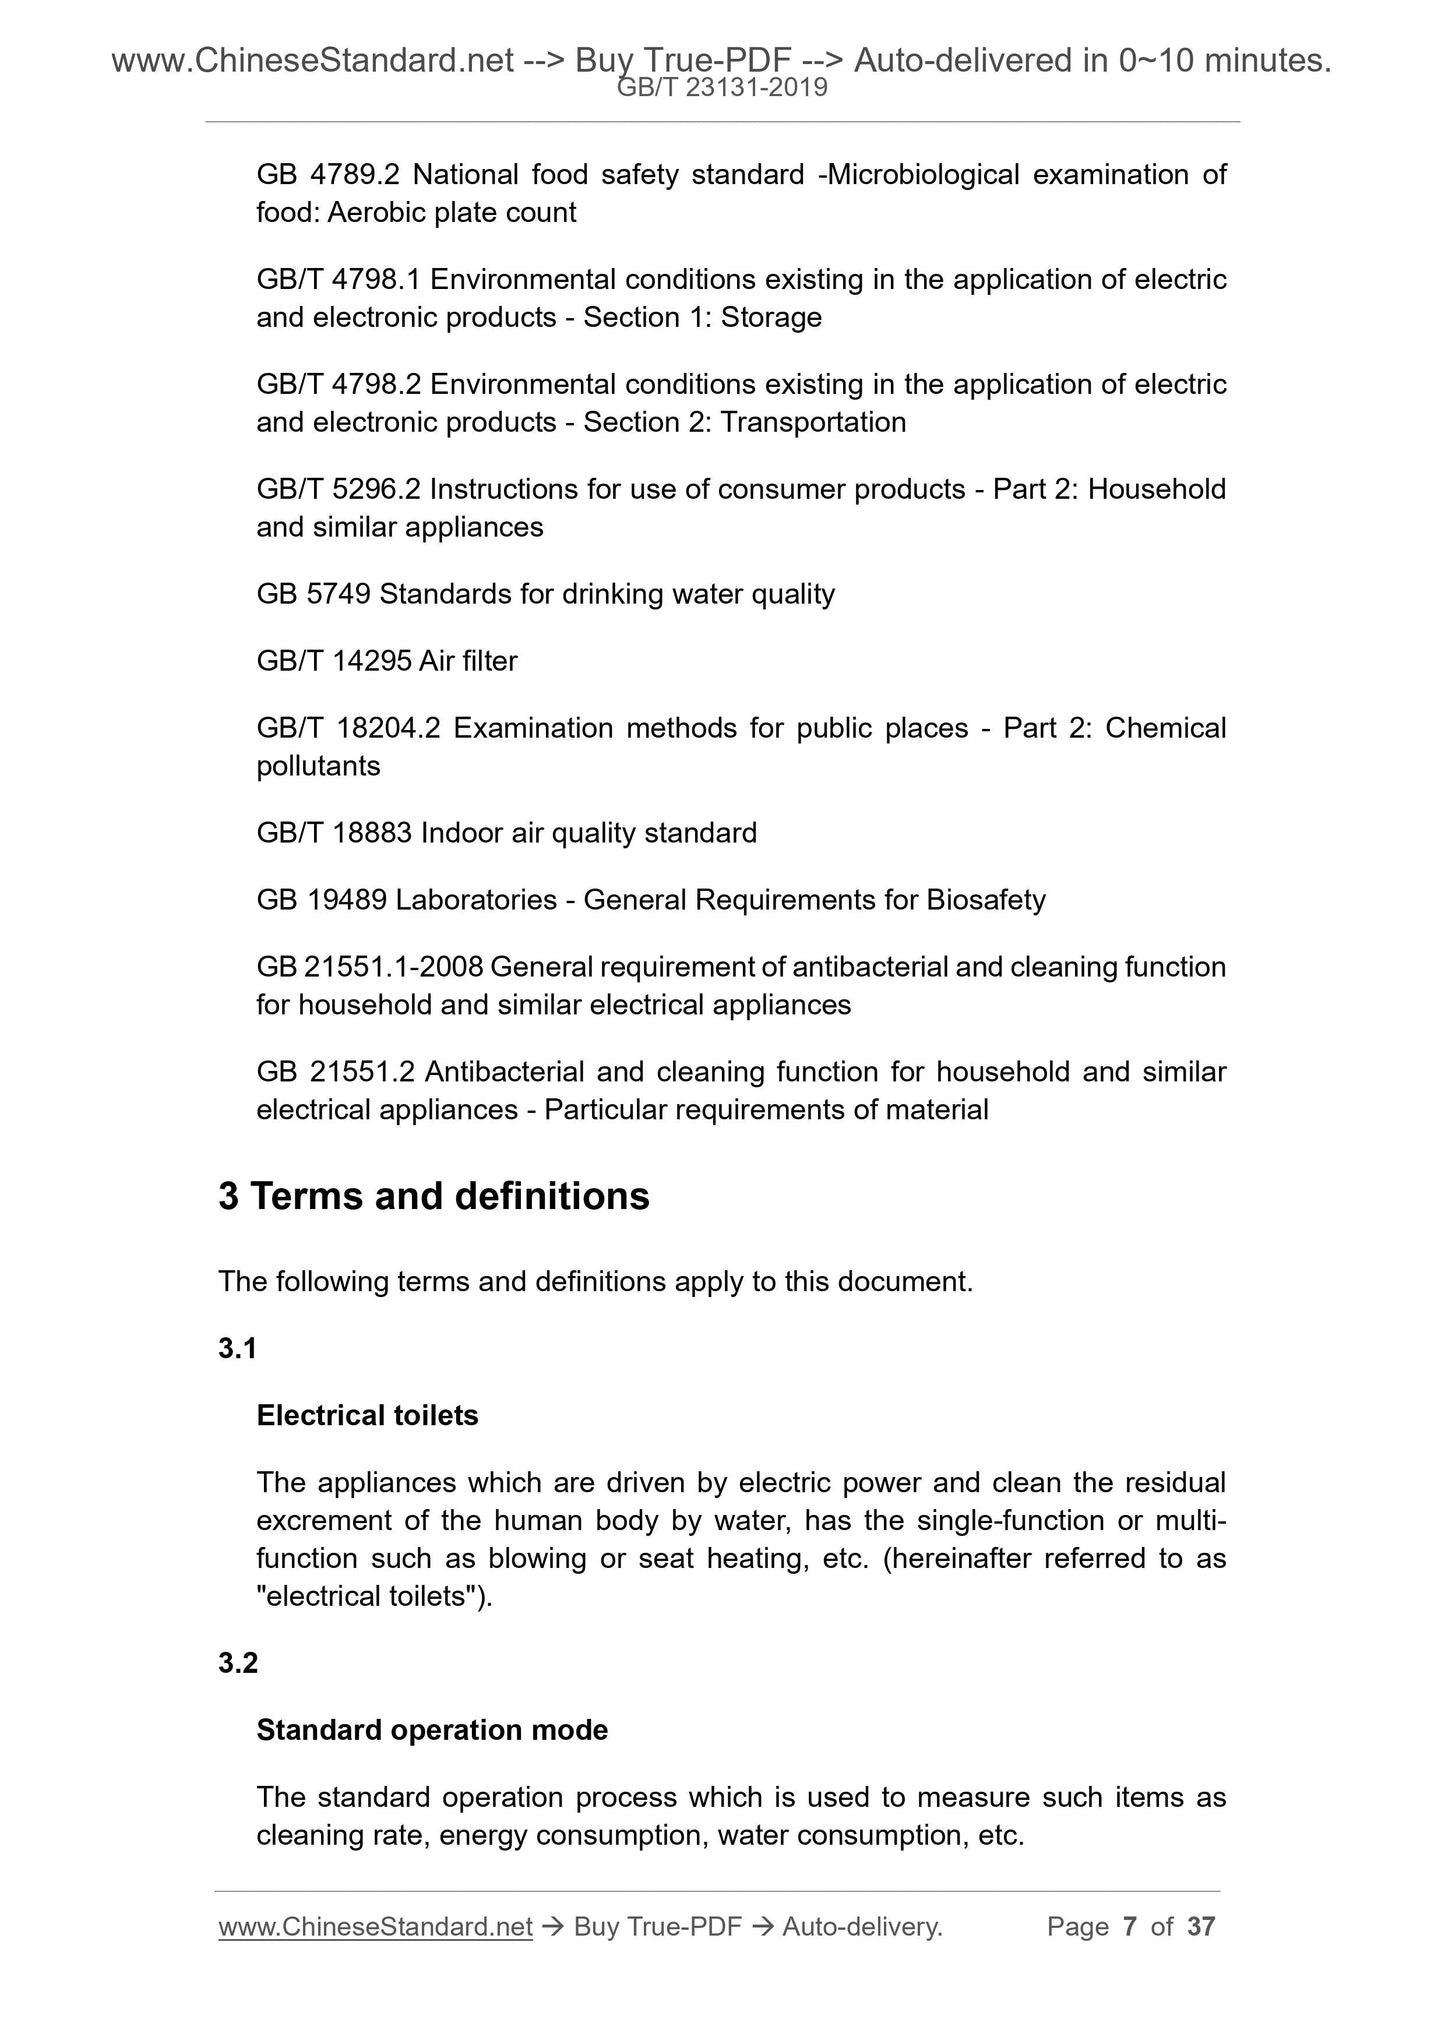 GB/T 23131-2019 Page 5